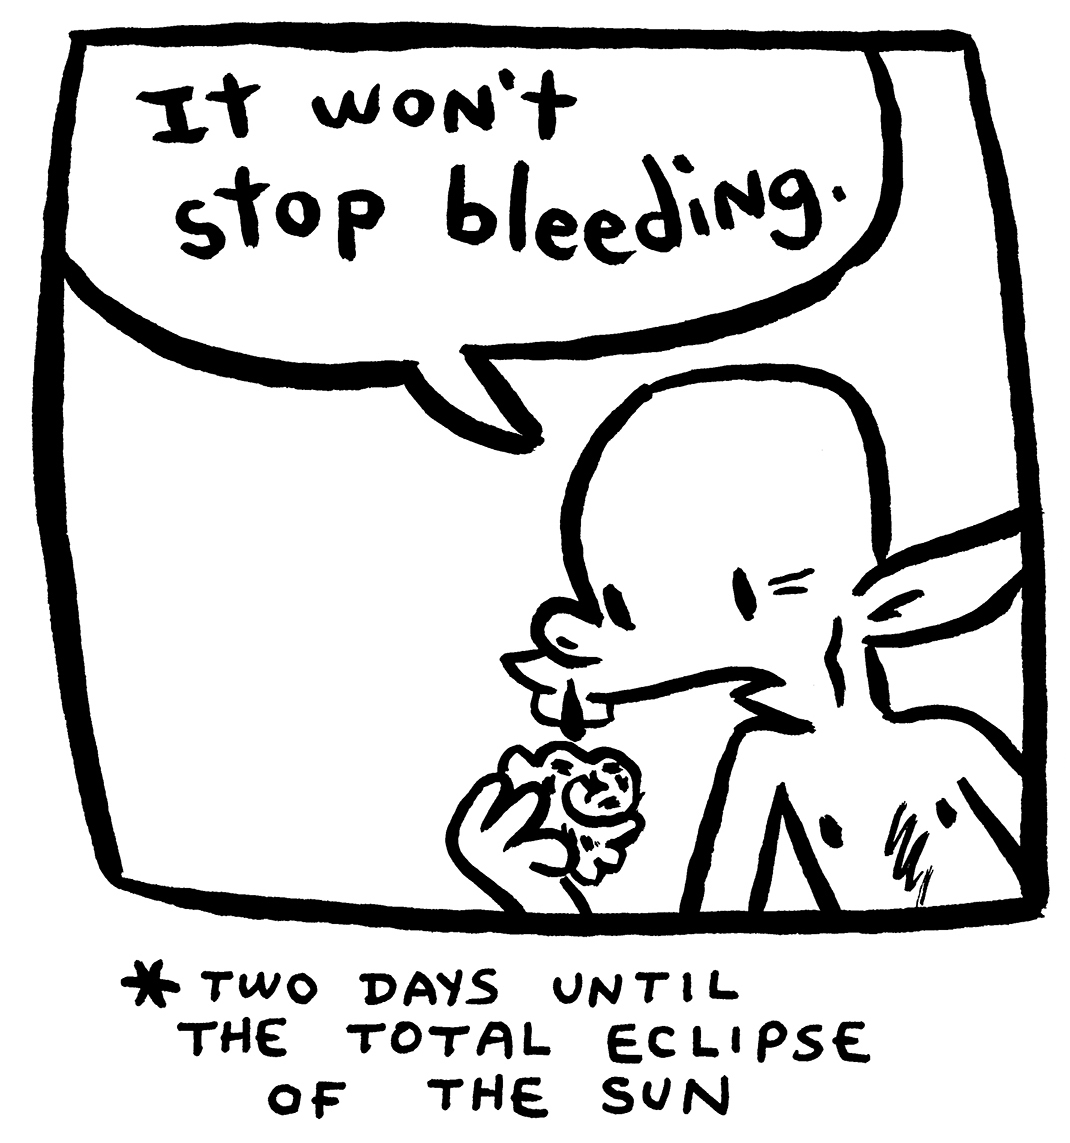 The eclipse is coming and everyone is freaking the F out. I'm glad I started drawing American Elf again so I can document these historic events: patreon.com/collection/439…